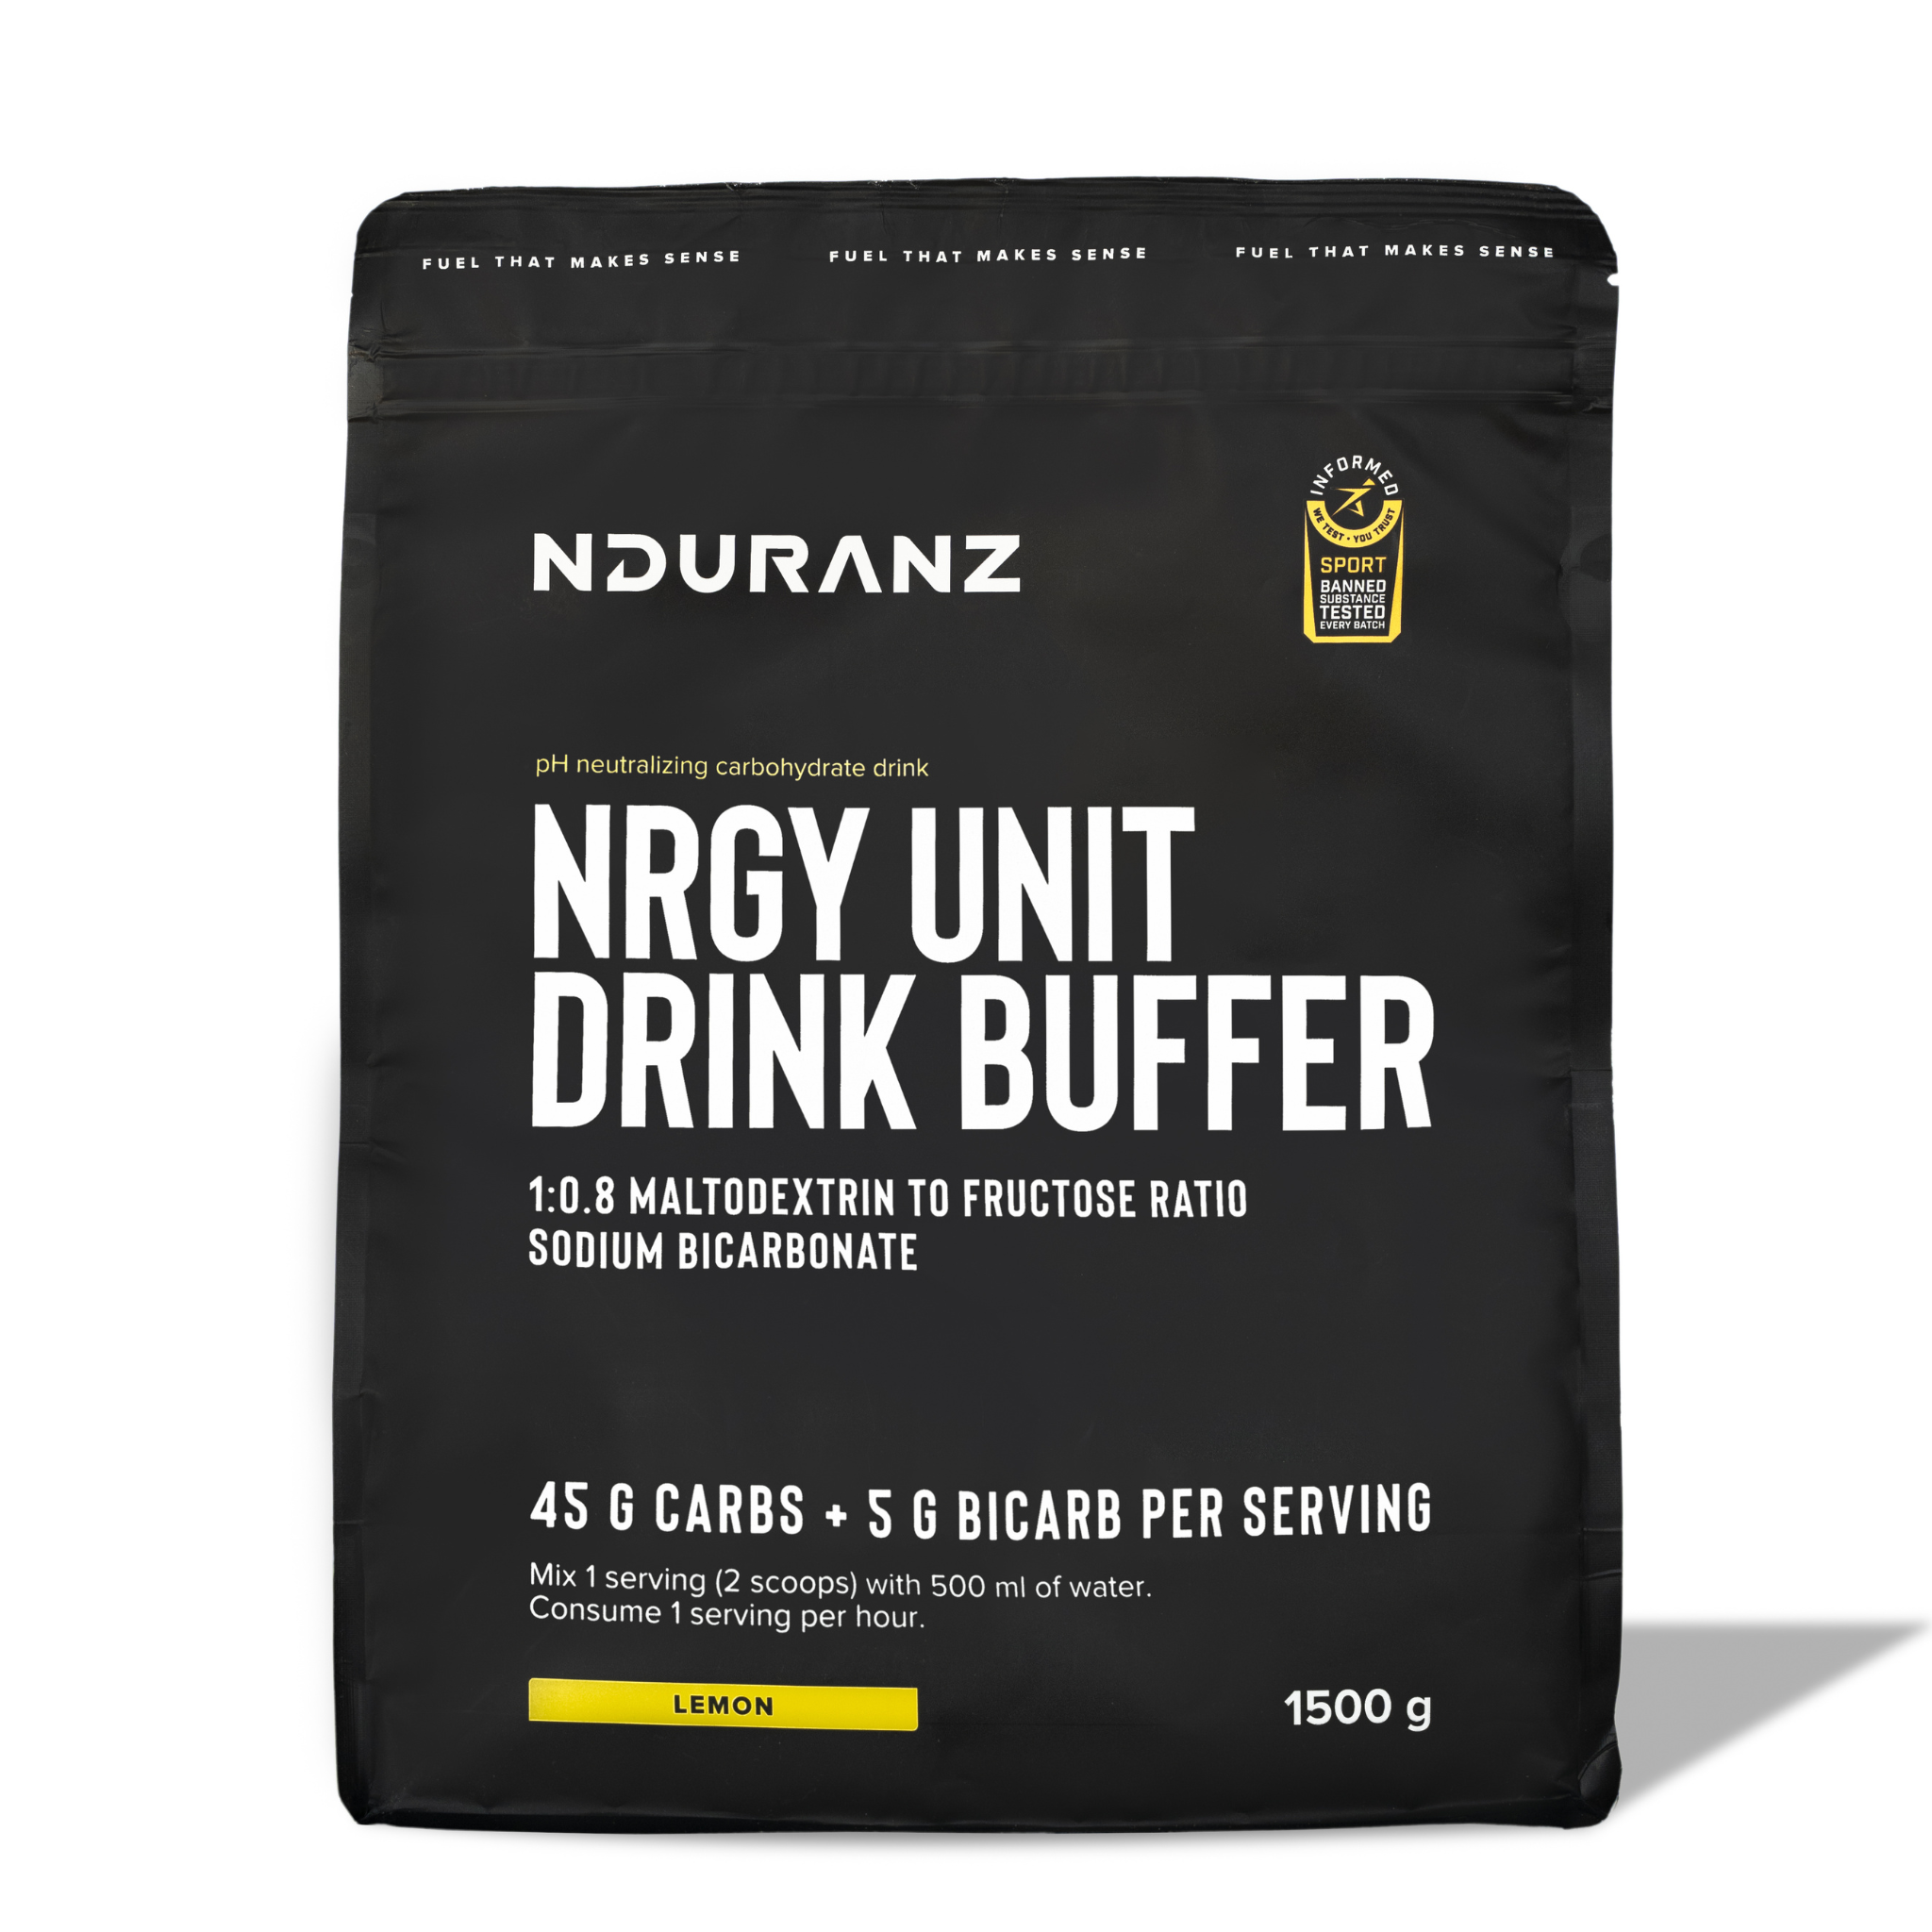 Ngry Unit Drink Buffer